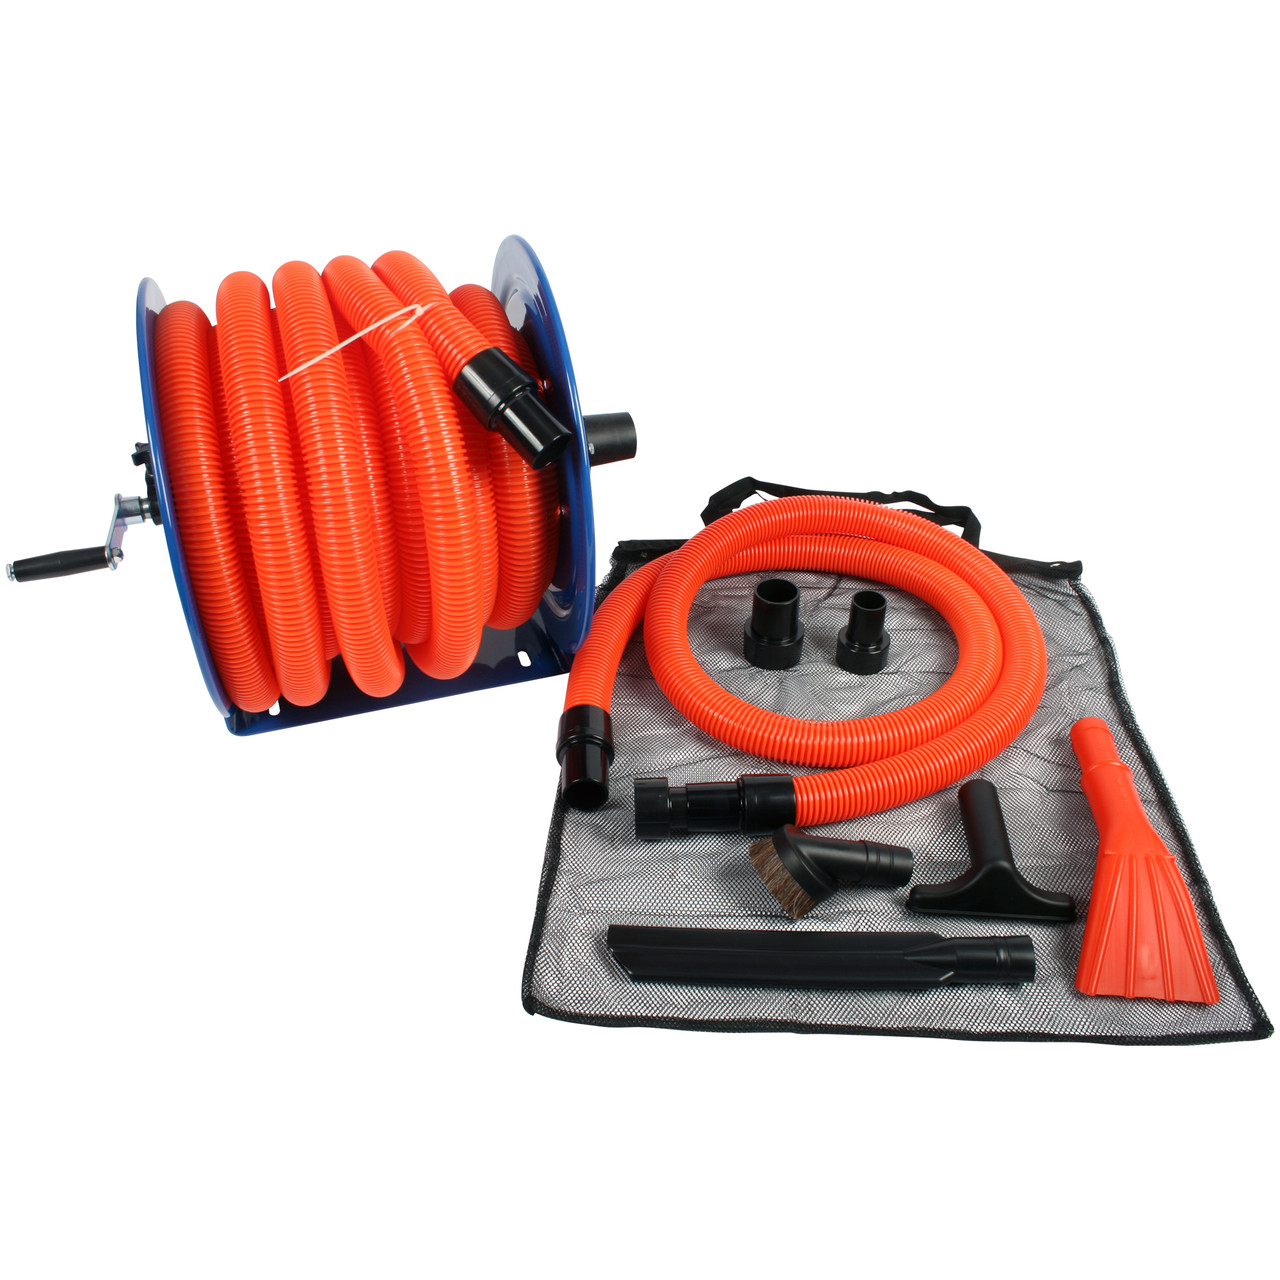 Garage Central Vacuum Kit 30 Foot Orange with wands and tools